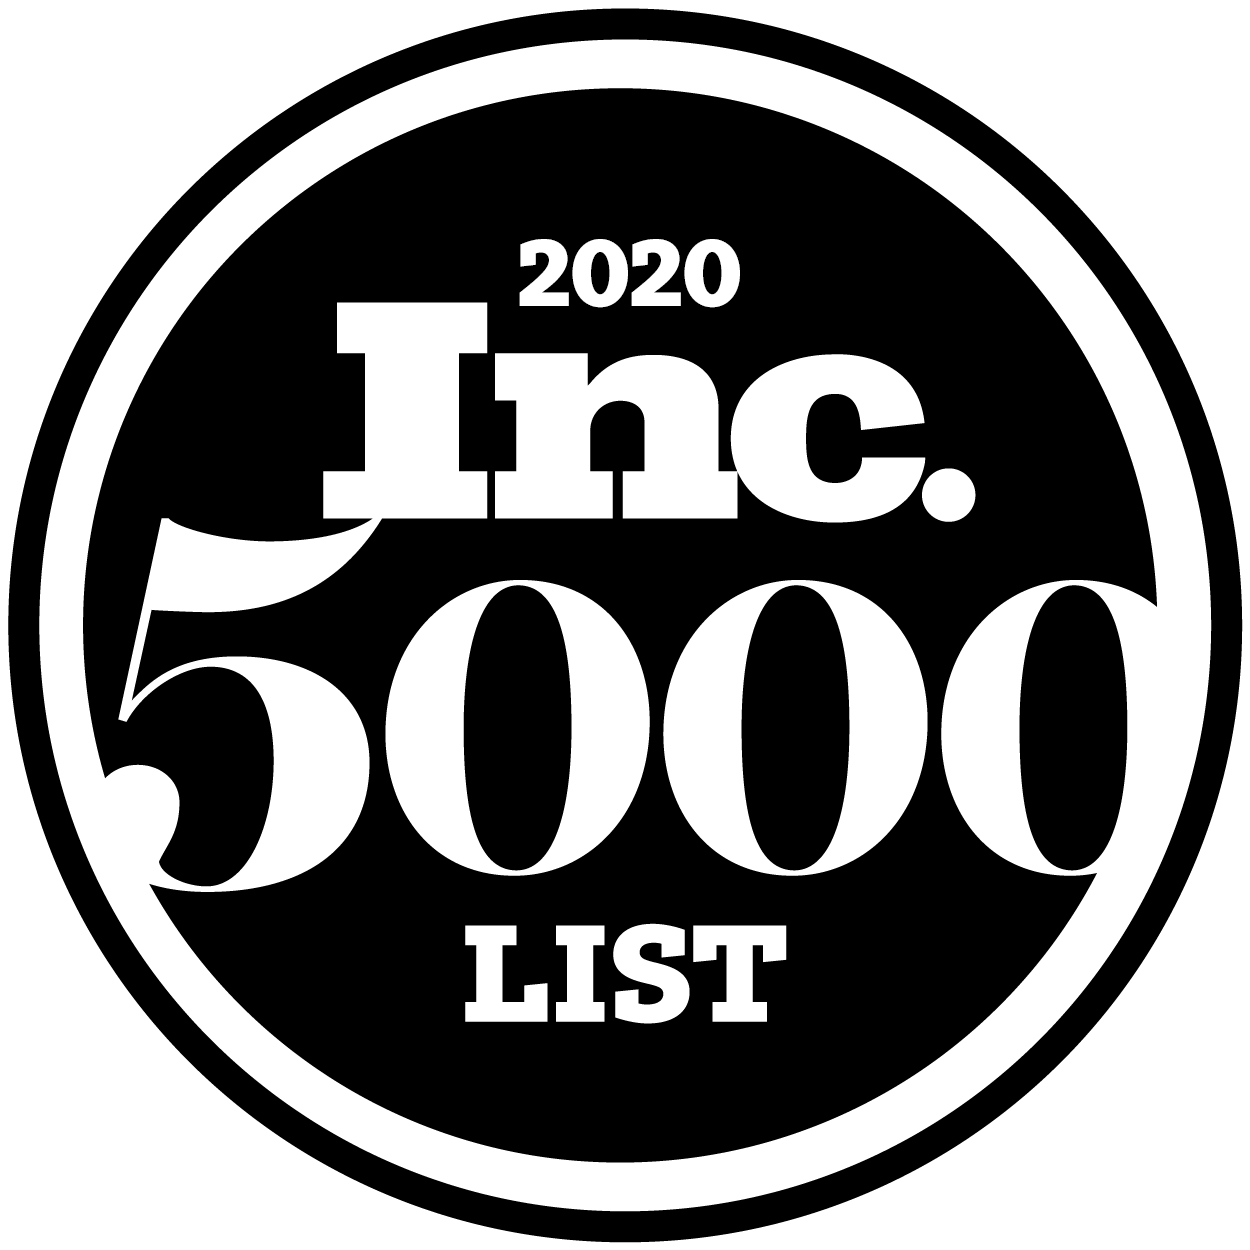 For the second year in a row, we have been named to Inc. magazine’s annual Inc. 5000 list, a ranking of the nation’s fastest-growing private companies. 